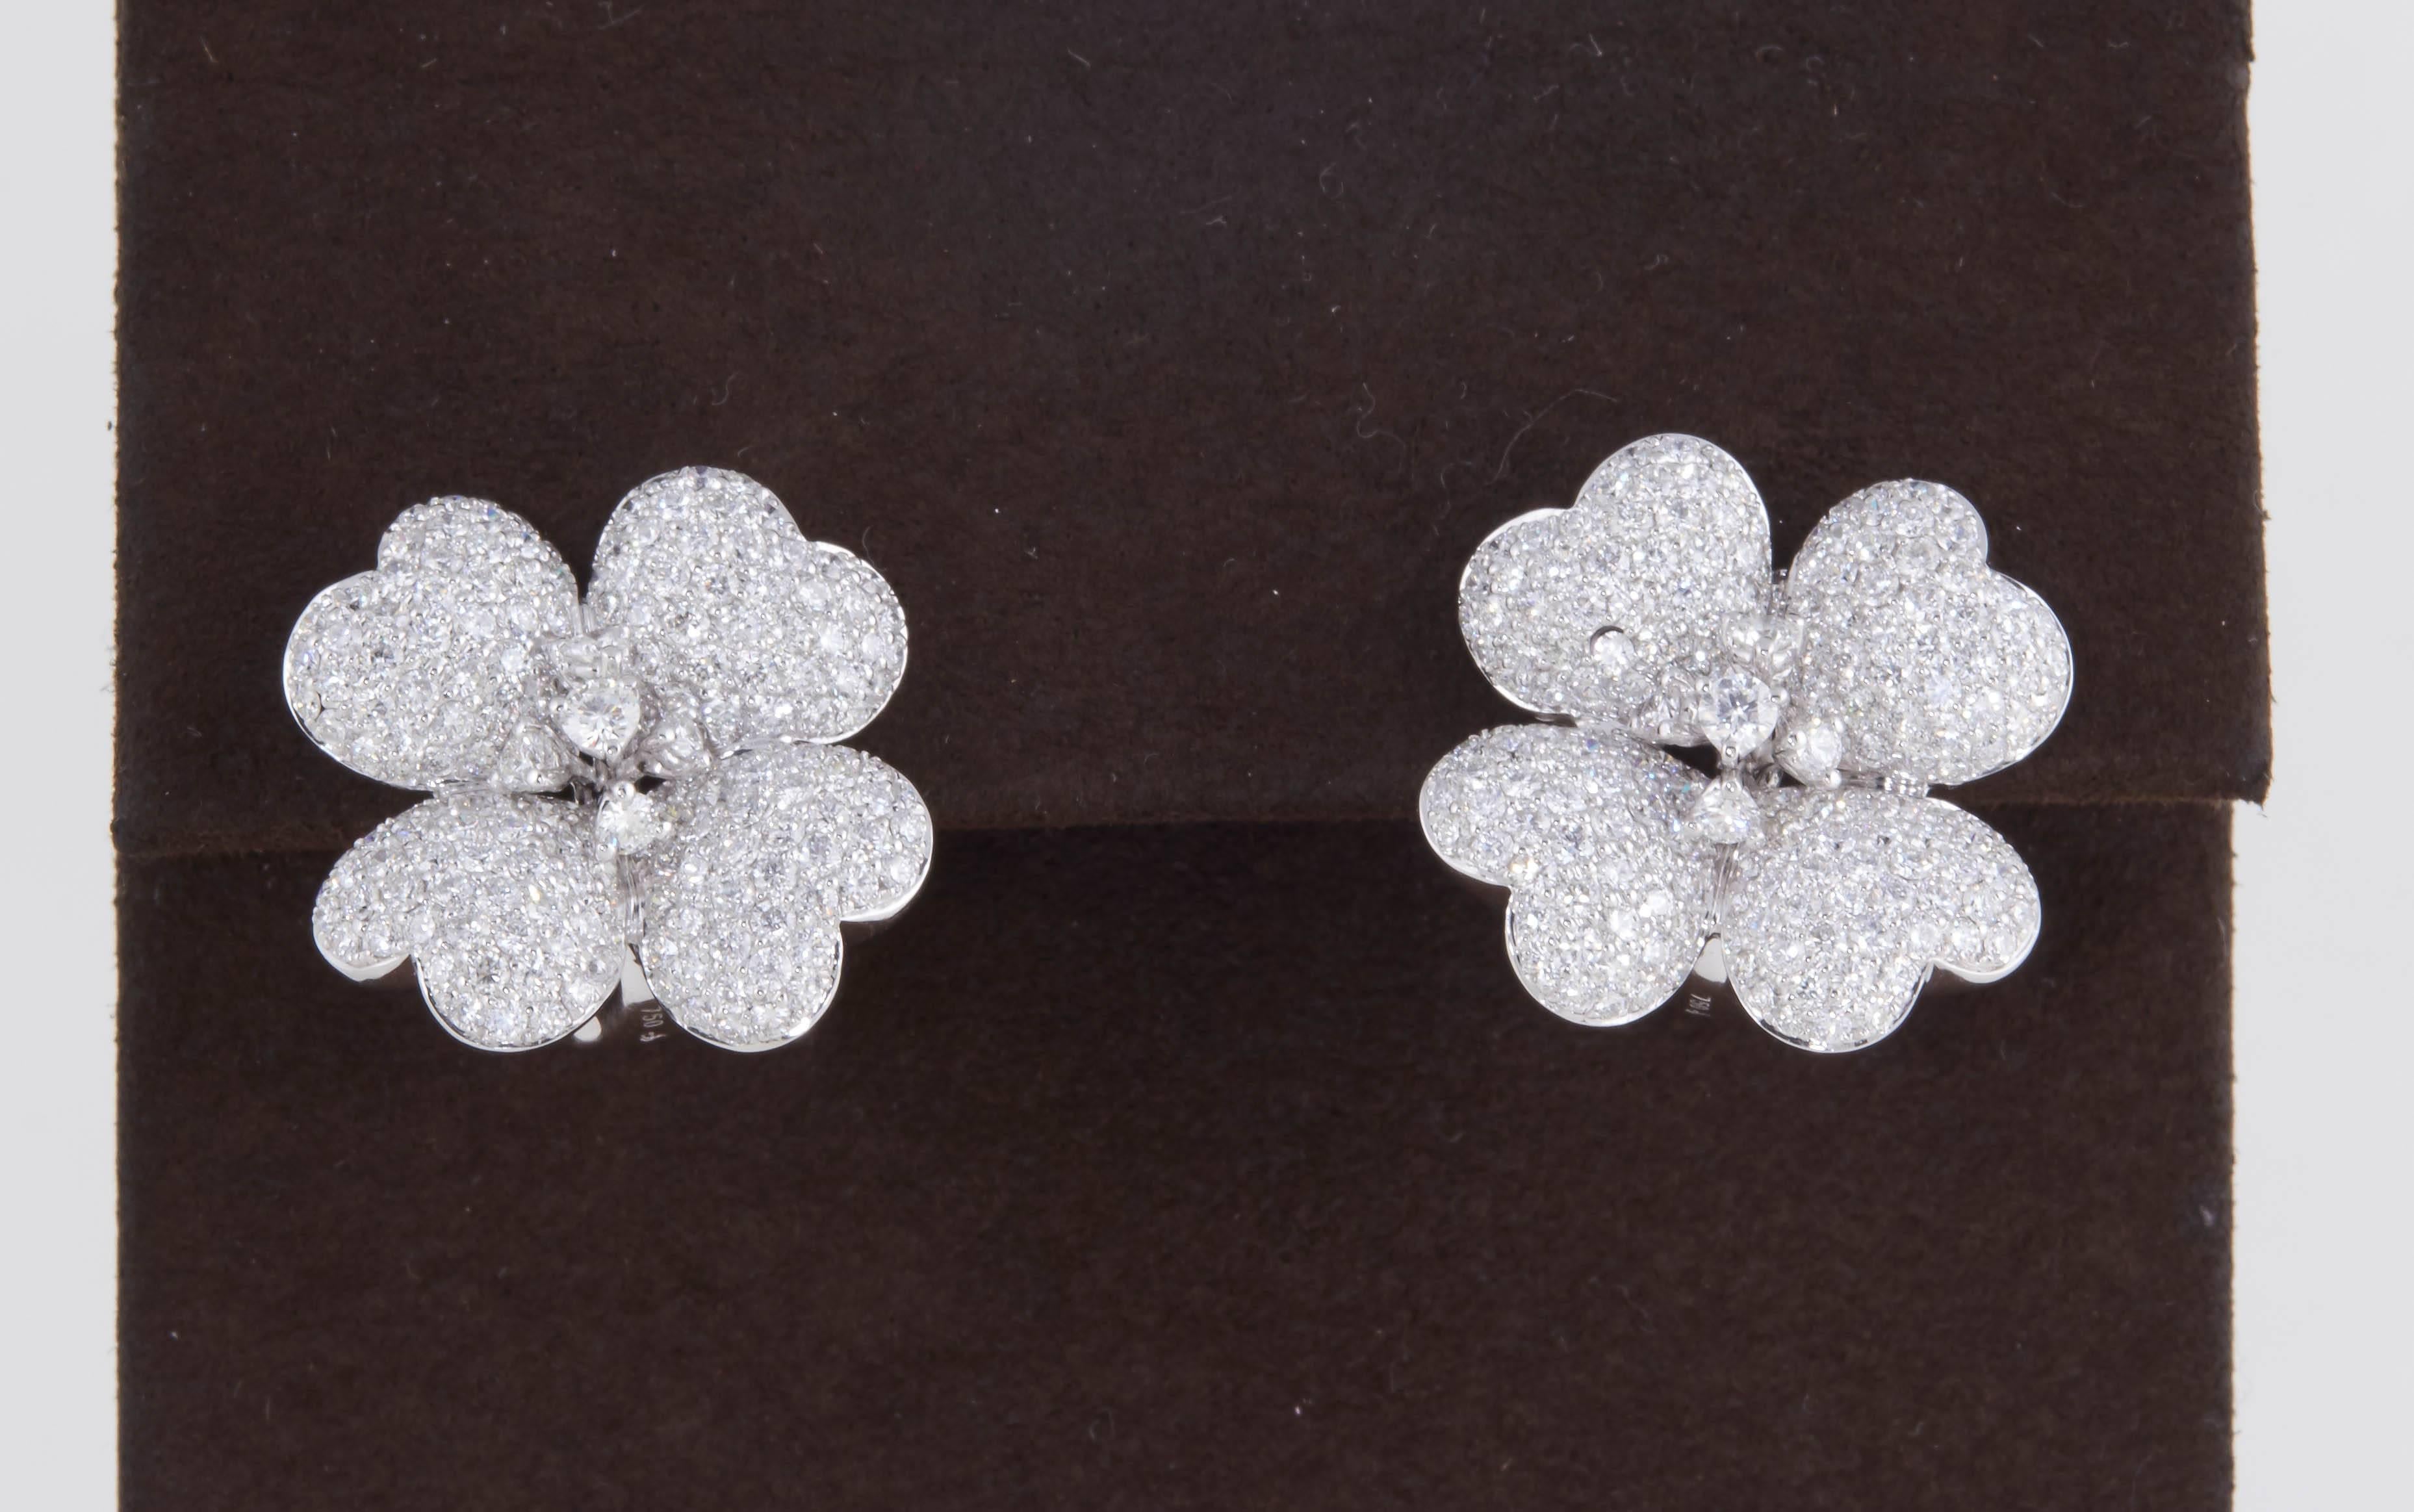 
A fabulous pair of diamond flower earrings. 

Tons of sparkle set on 4 delicately designed flower petals. 

4.16 carats of high quality F color VS clarity round brilliant cut diamonds set in 18k white gold.

Approximately .78 inches in diameter.